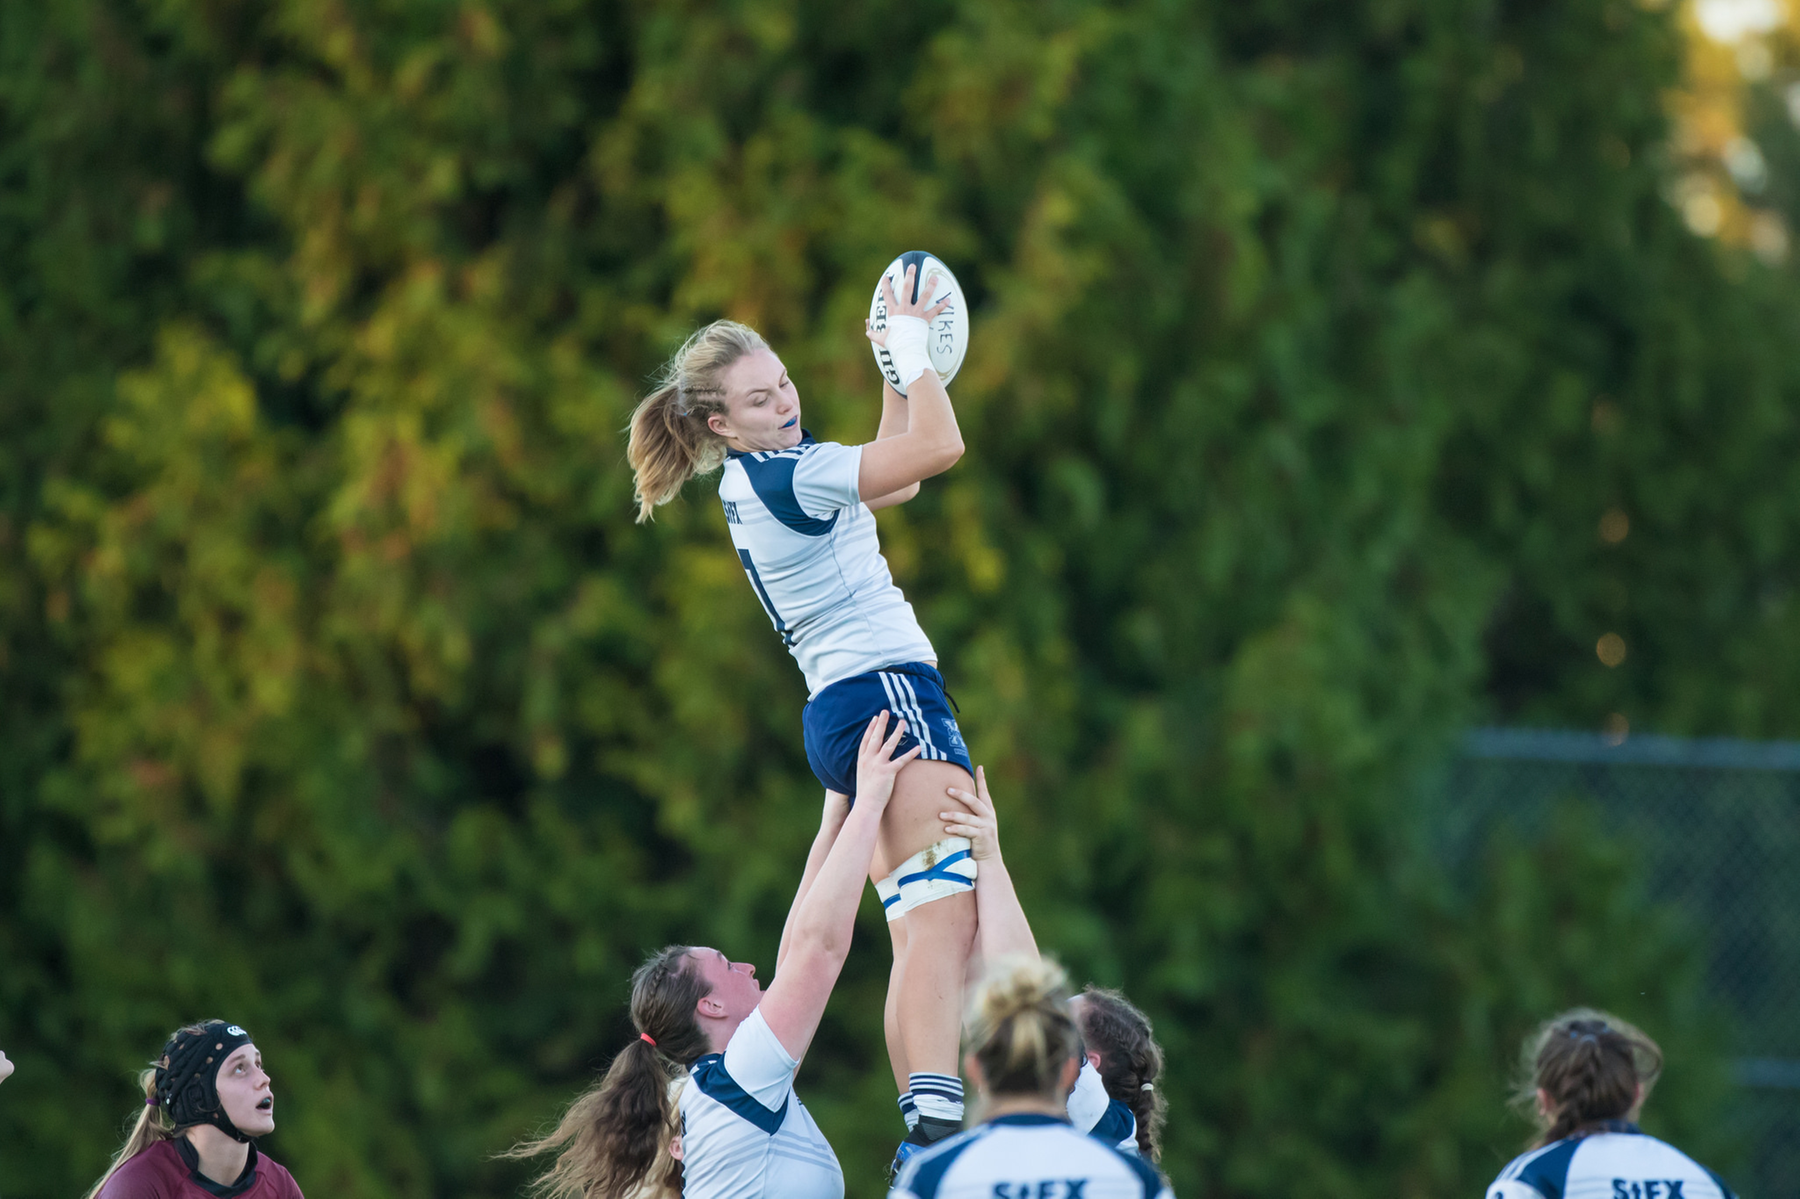 2016 Women's Rugby Championships Quarter Final #3: Last second stand allows St. FX to squeak by Concordia